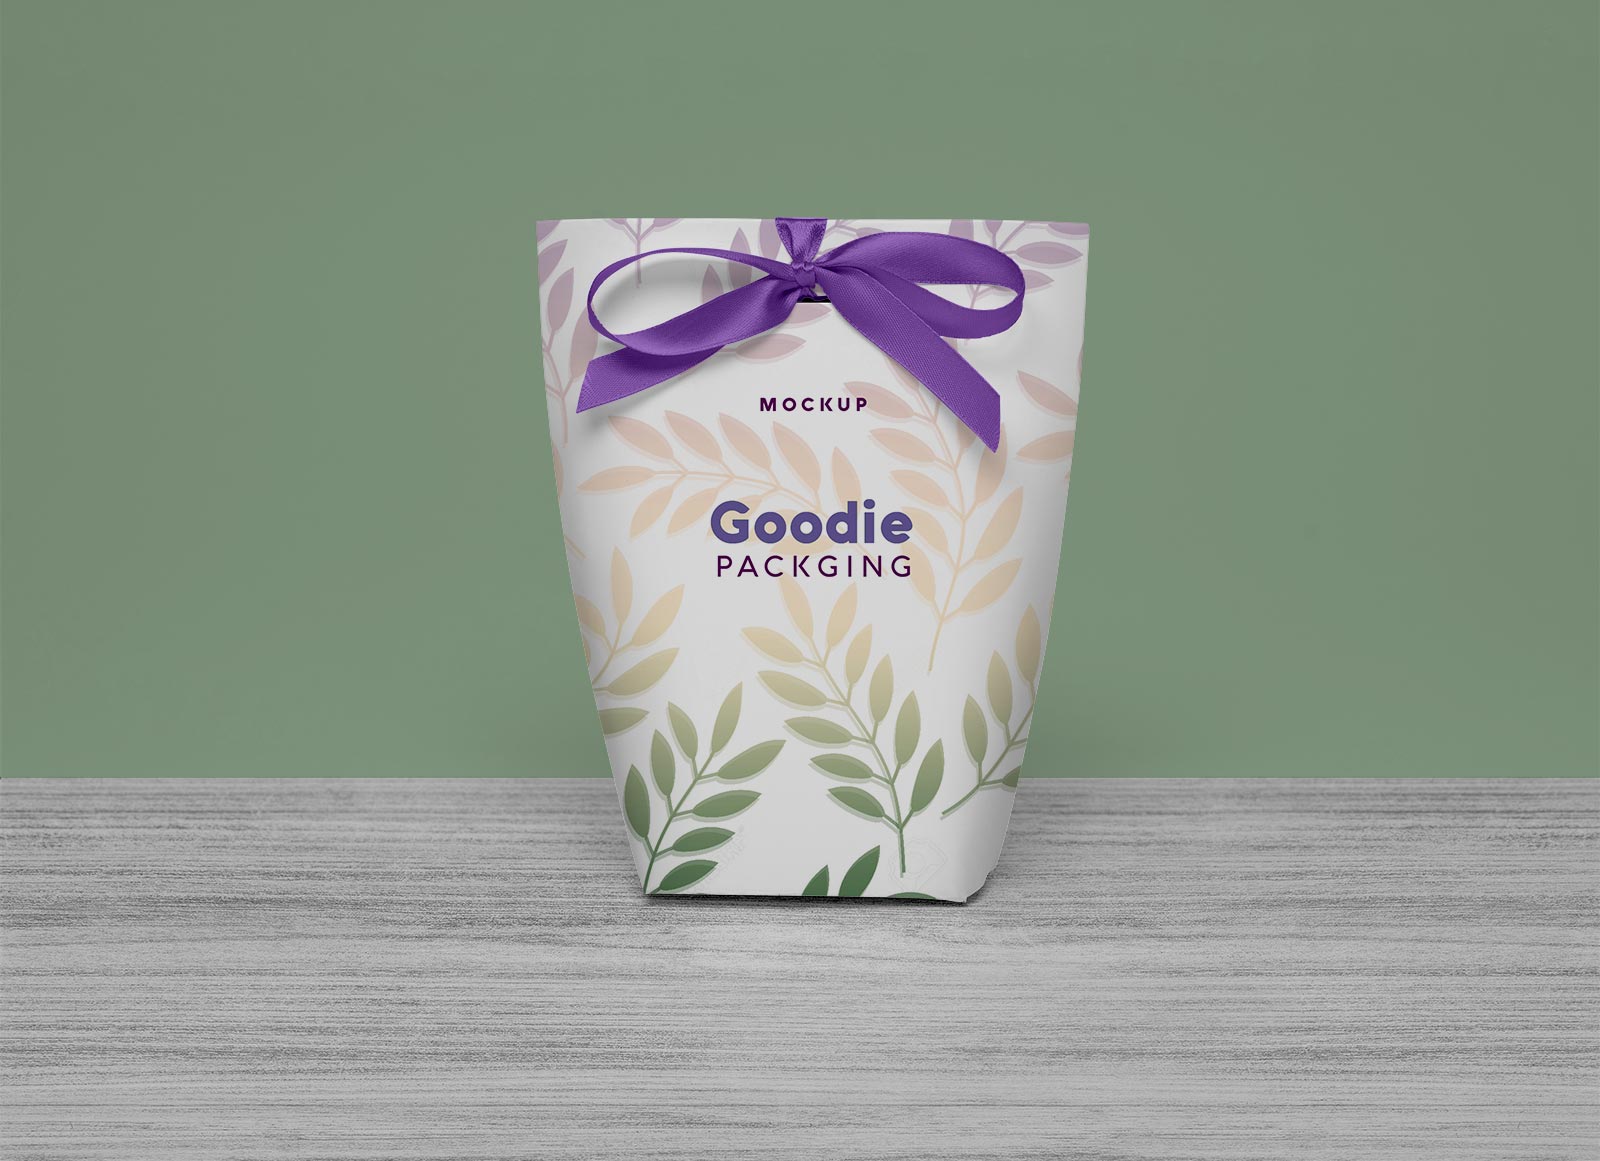 Free-Candy-Goodie-Bag-Packaging-Mockup-PSD-File